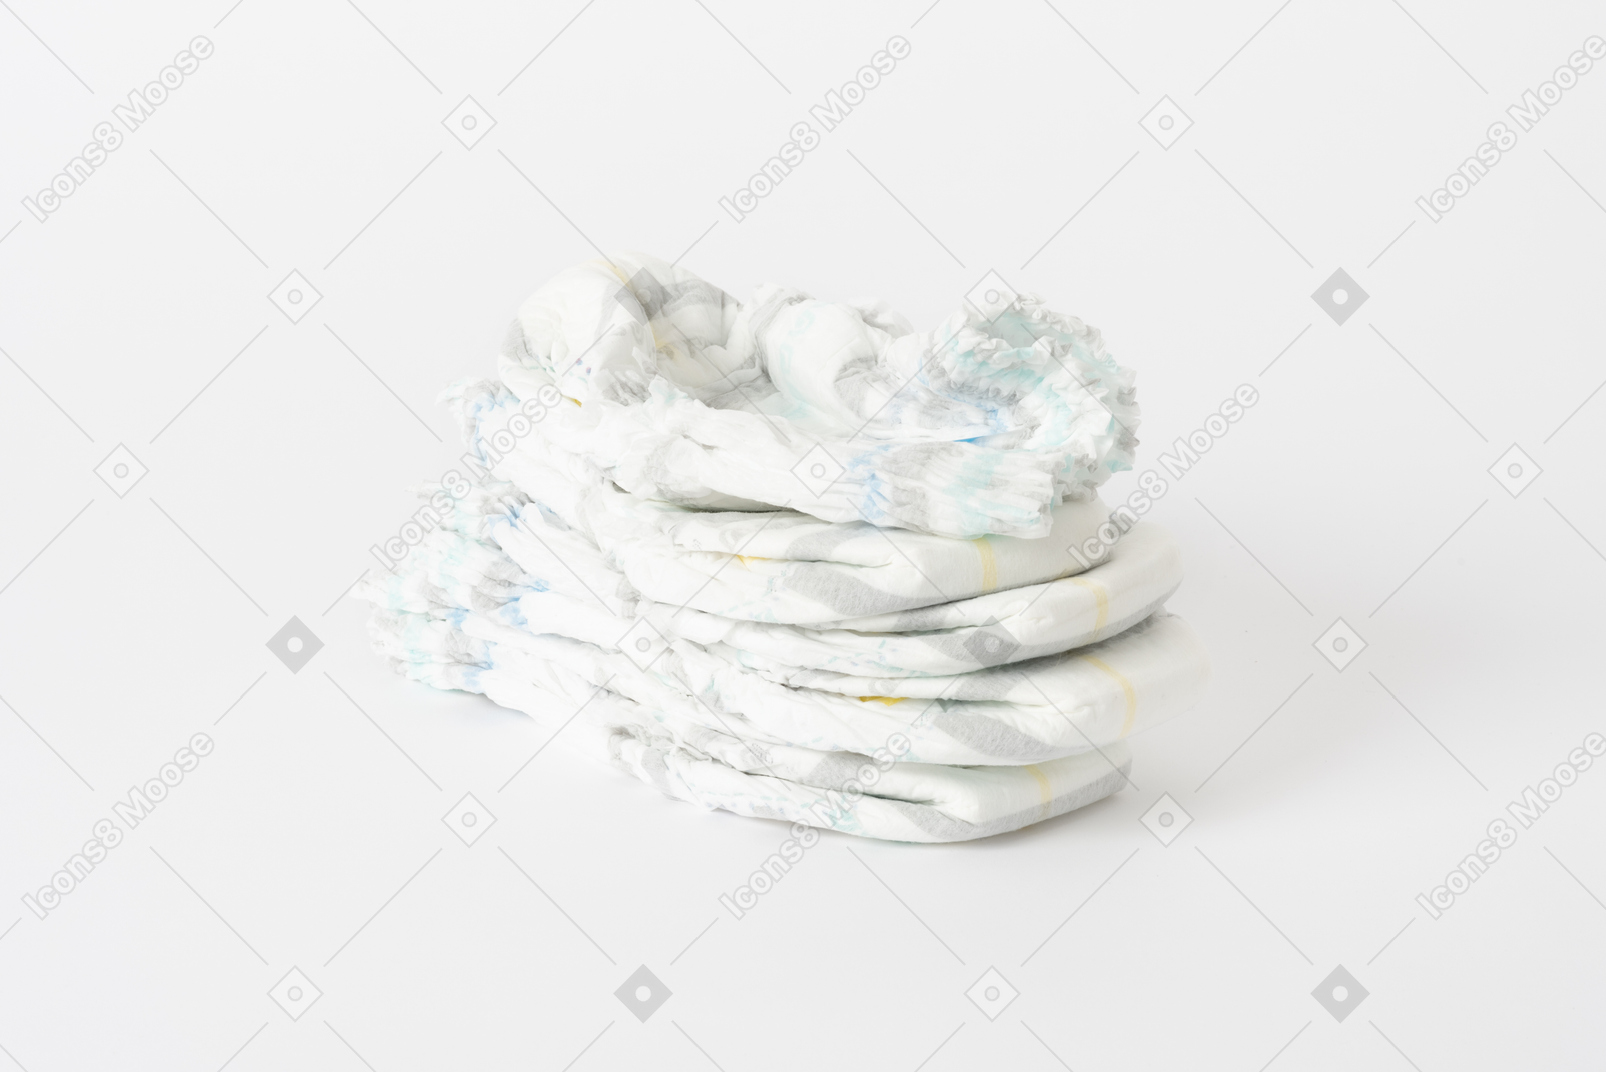 A stack of diapers